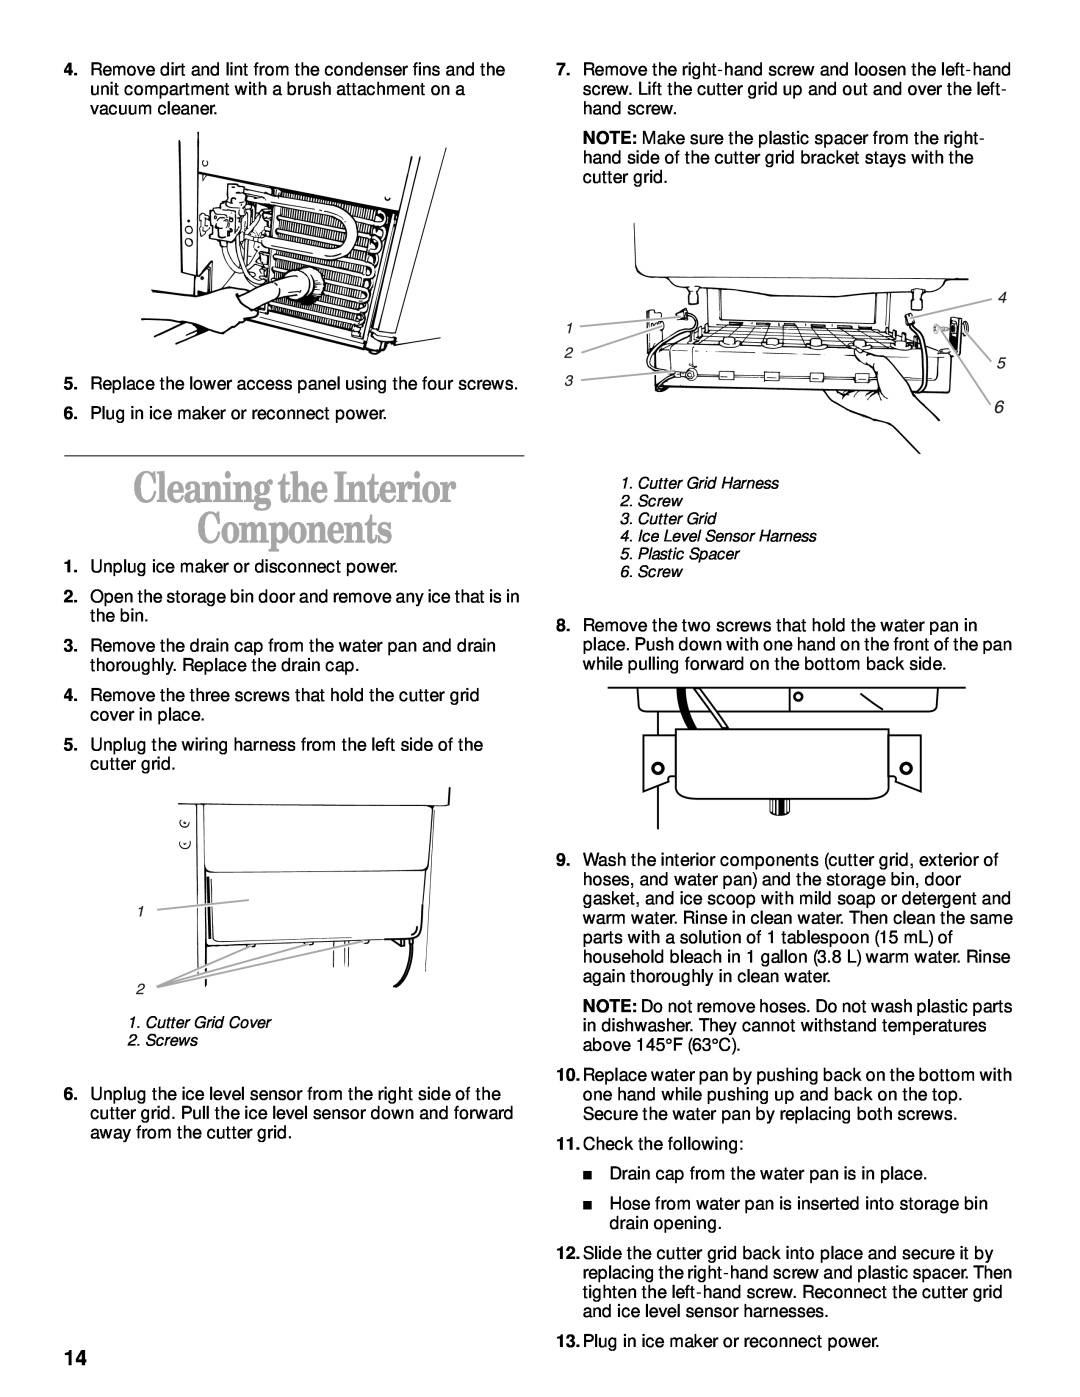 Whirlpool 2208357 manual Cleaningthe Interior Components, Cutter Grid Cover 2. Screws 